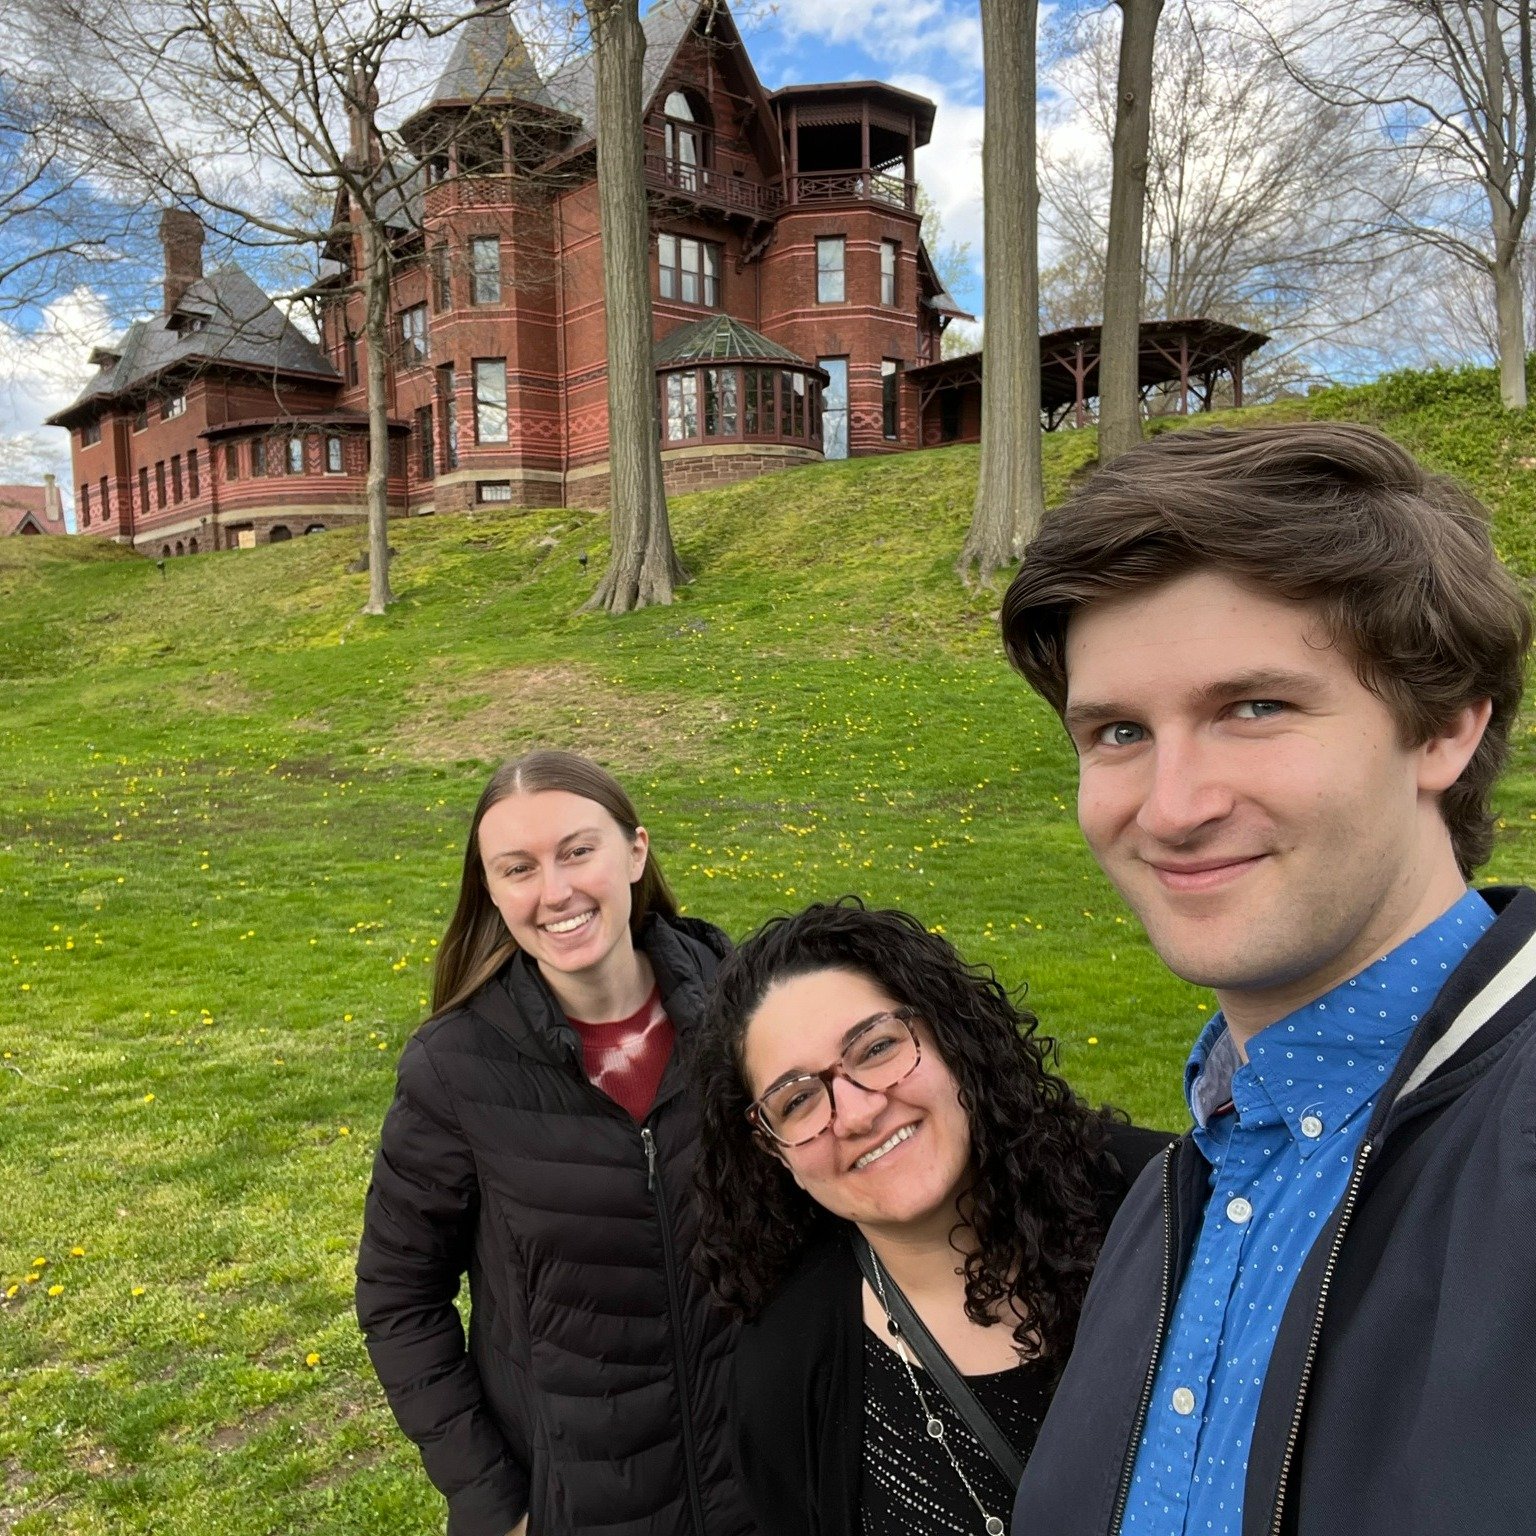 Members of the Legacy team visited the Mark Twain House and Museum the other day to do some research for our upcoming production of &ldquo;Mark Twain&rsquo;s The Diaries of Adam and Eve,&rdquo; playing May 30-June 16. There are so many neat things to